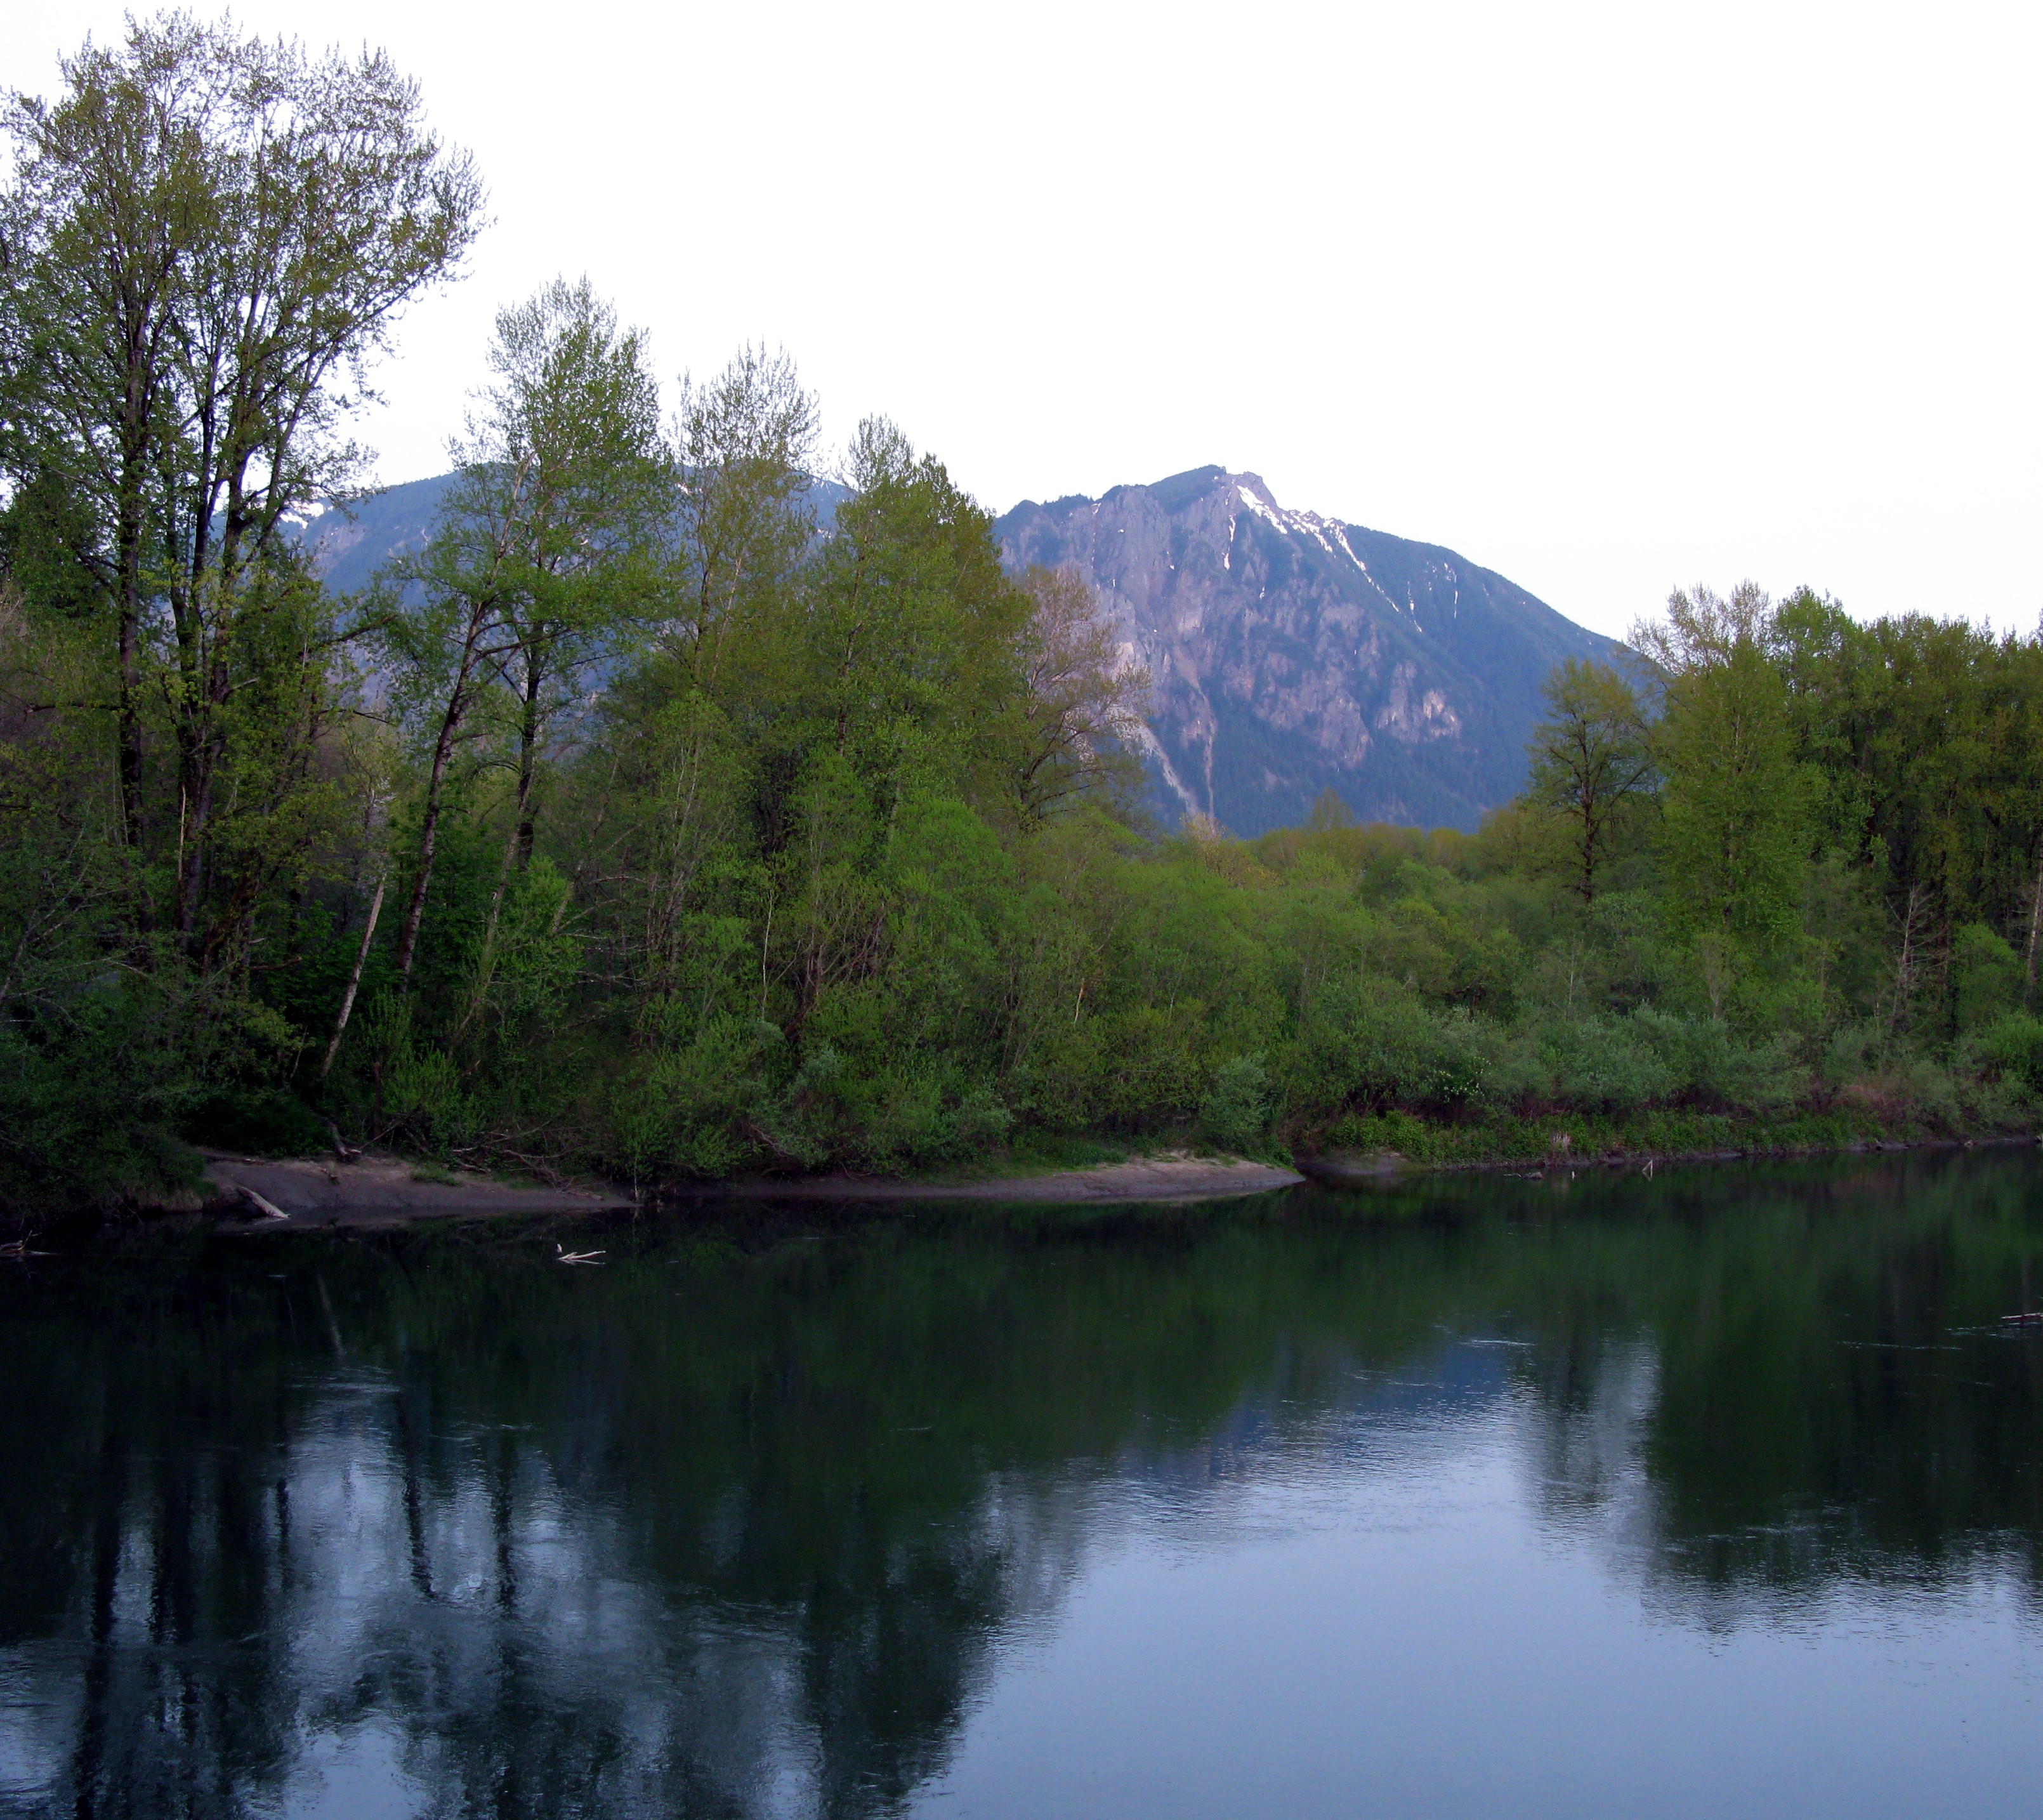 Mt Si from Snoqualmie River